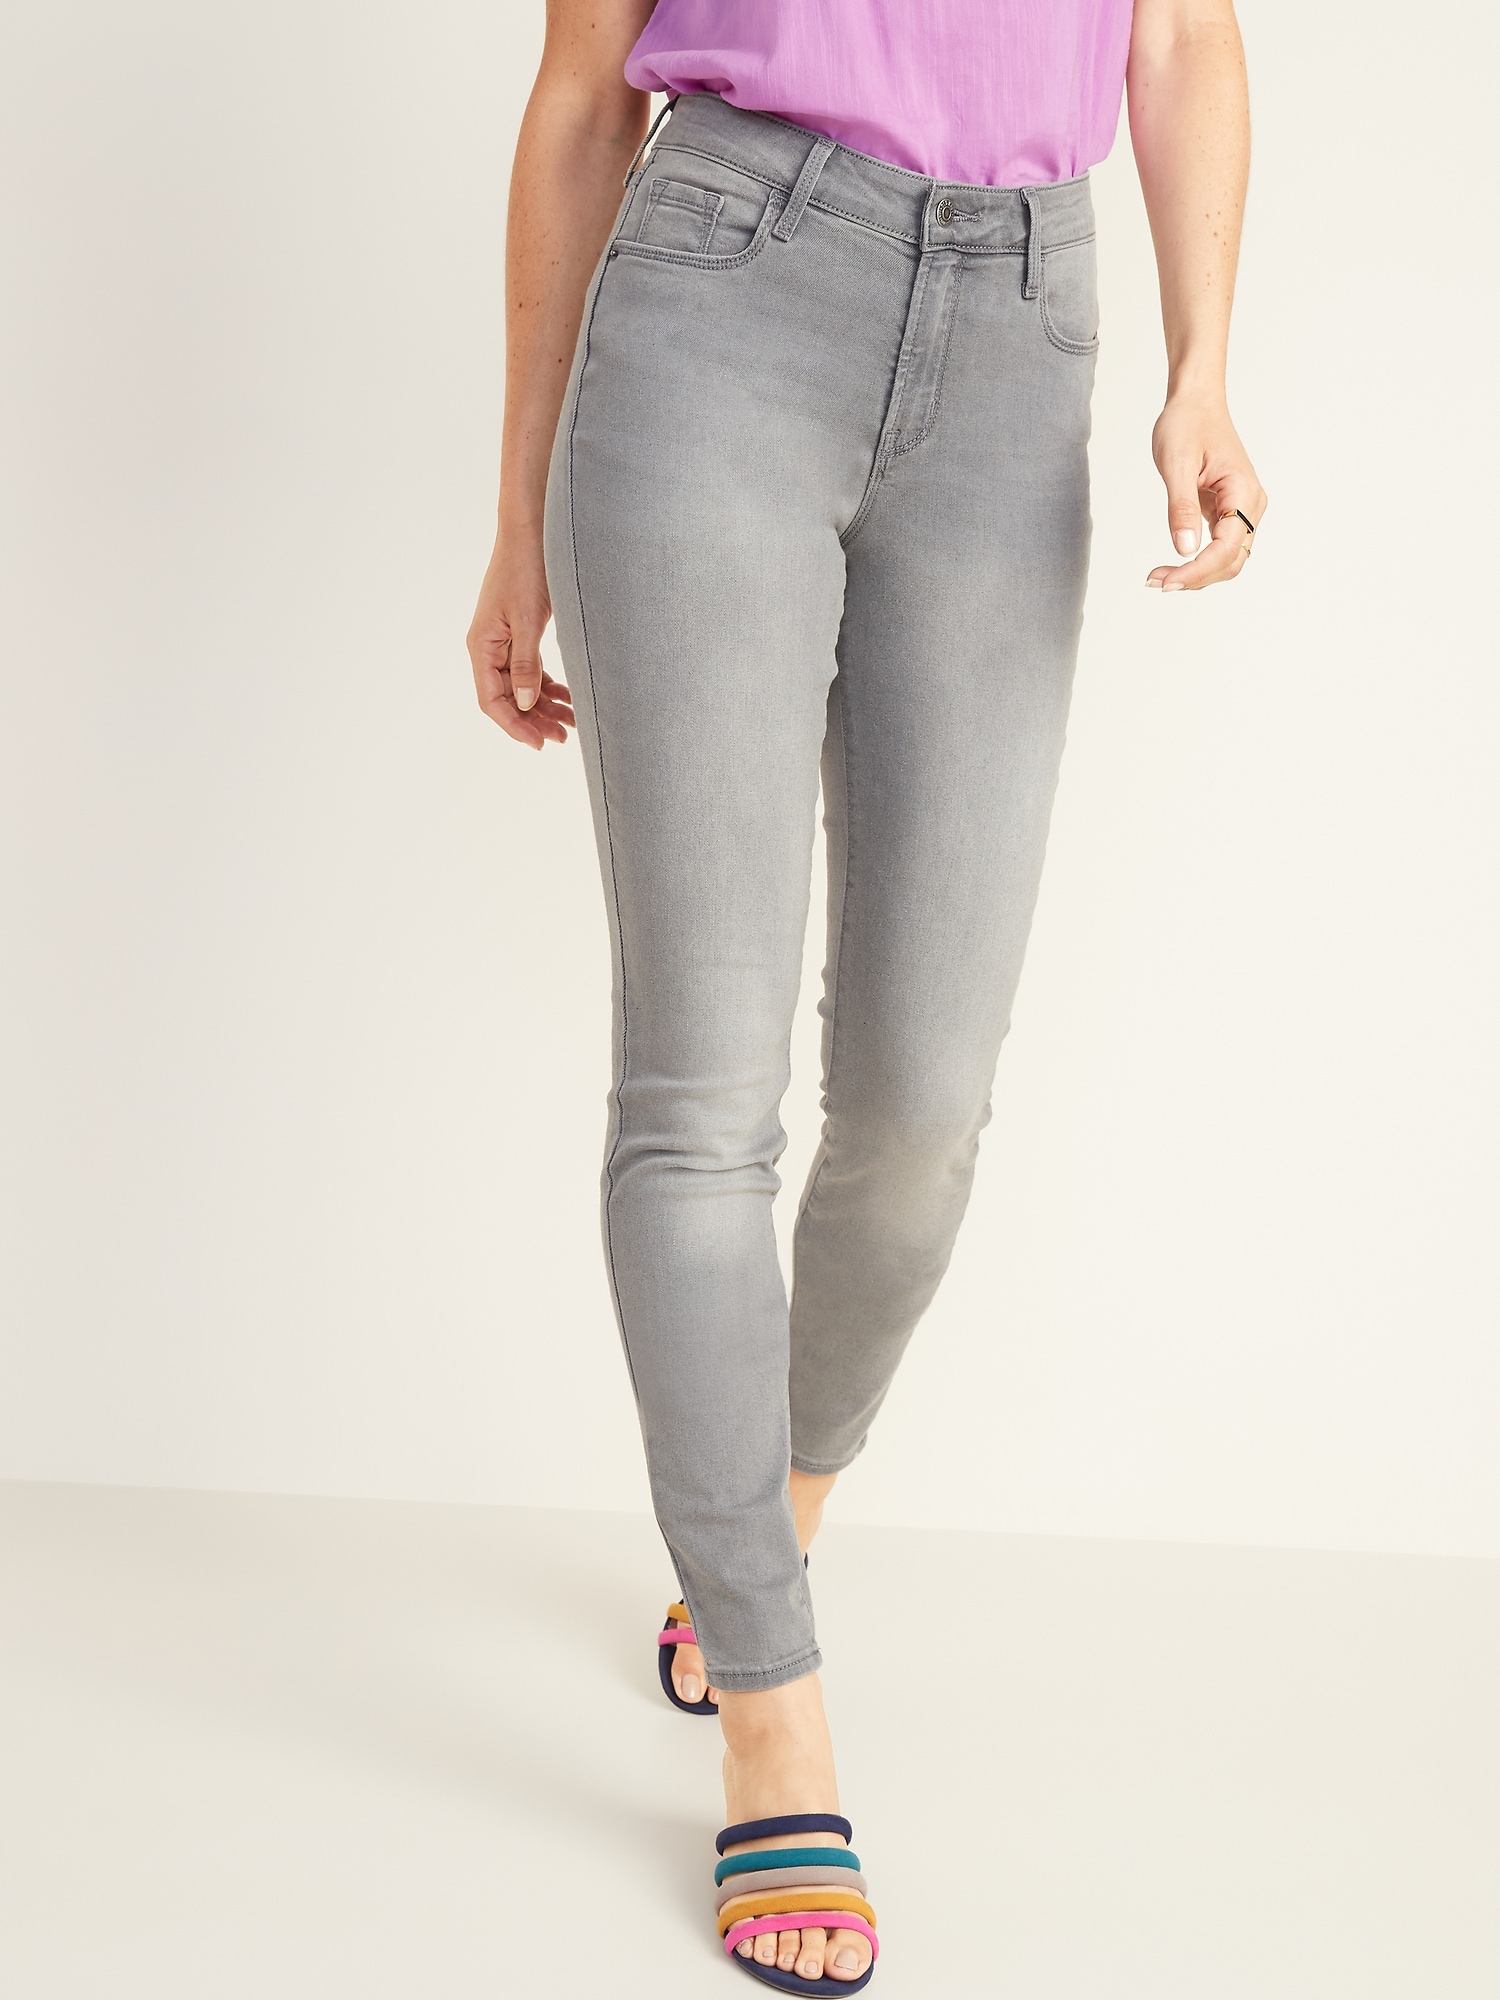 gray jeans old navy